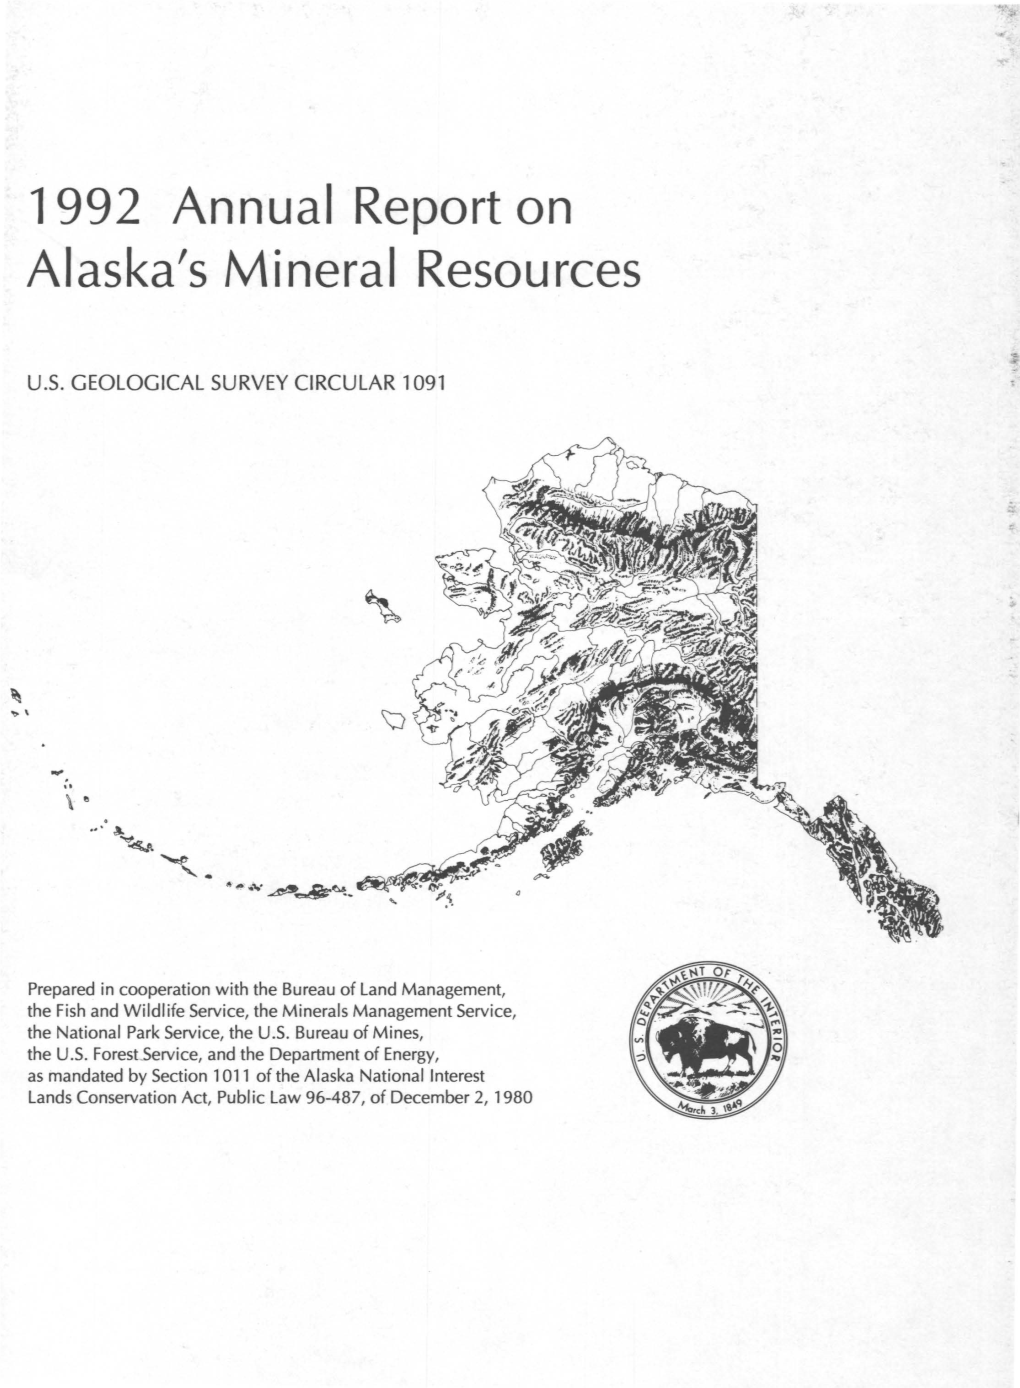 1992 Annual Report on Alaska's Mineral Resources